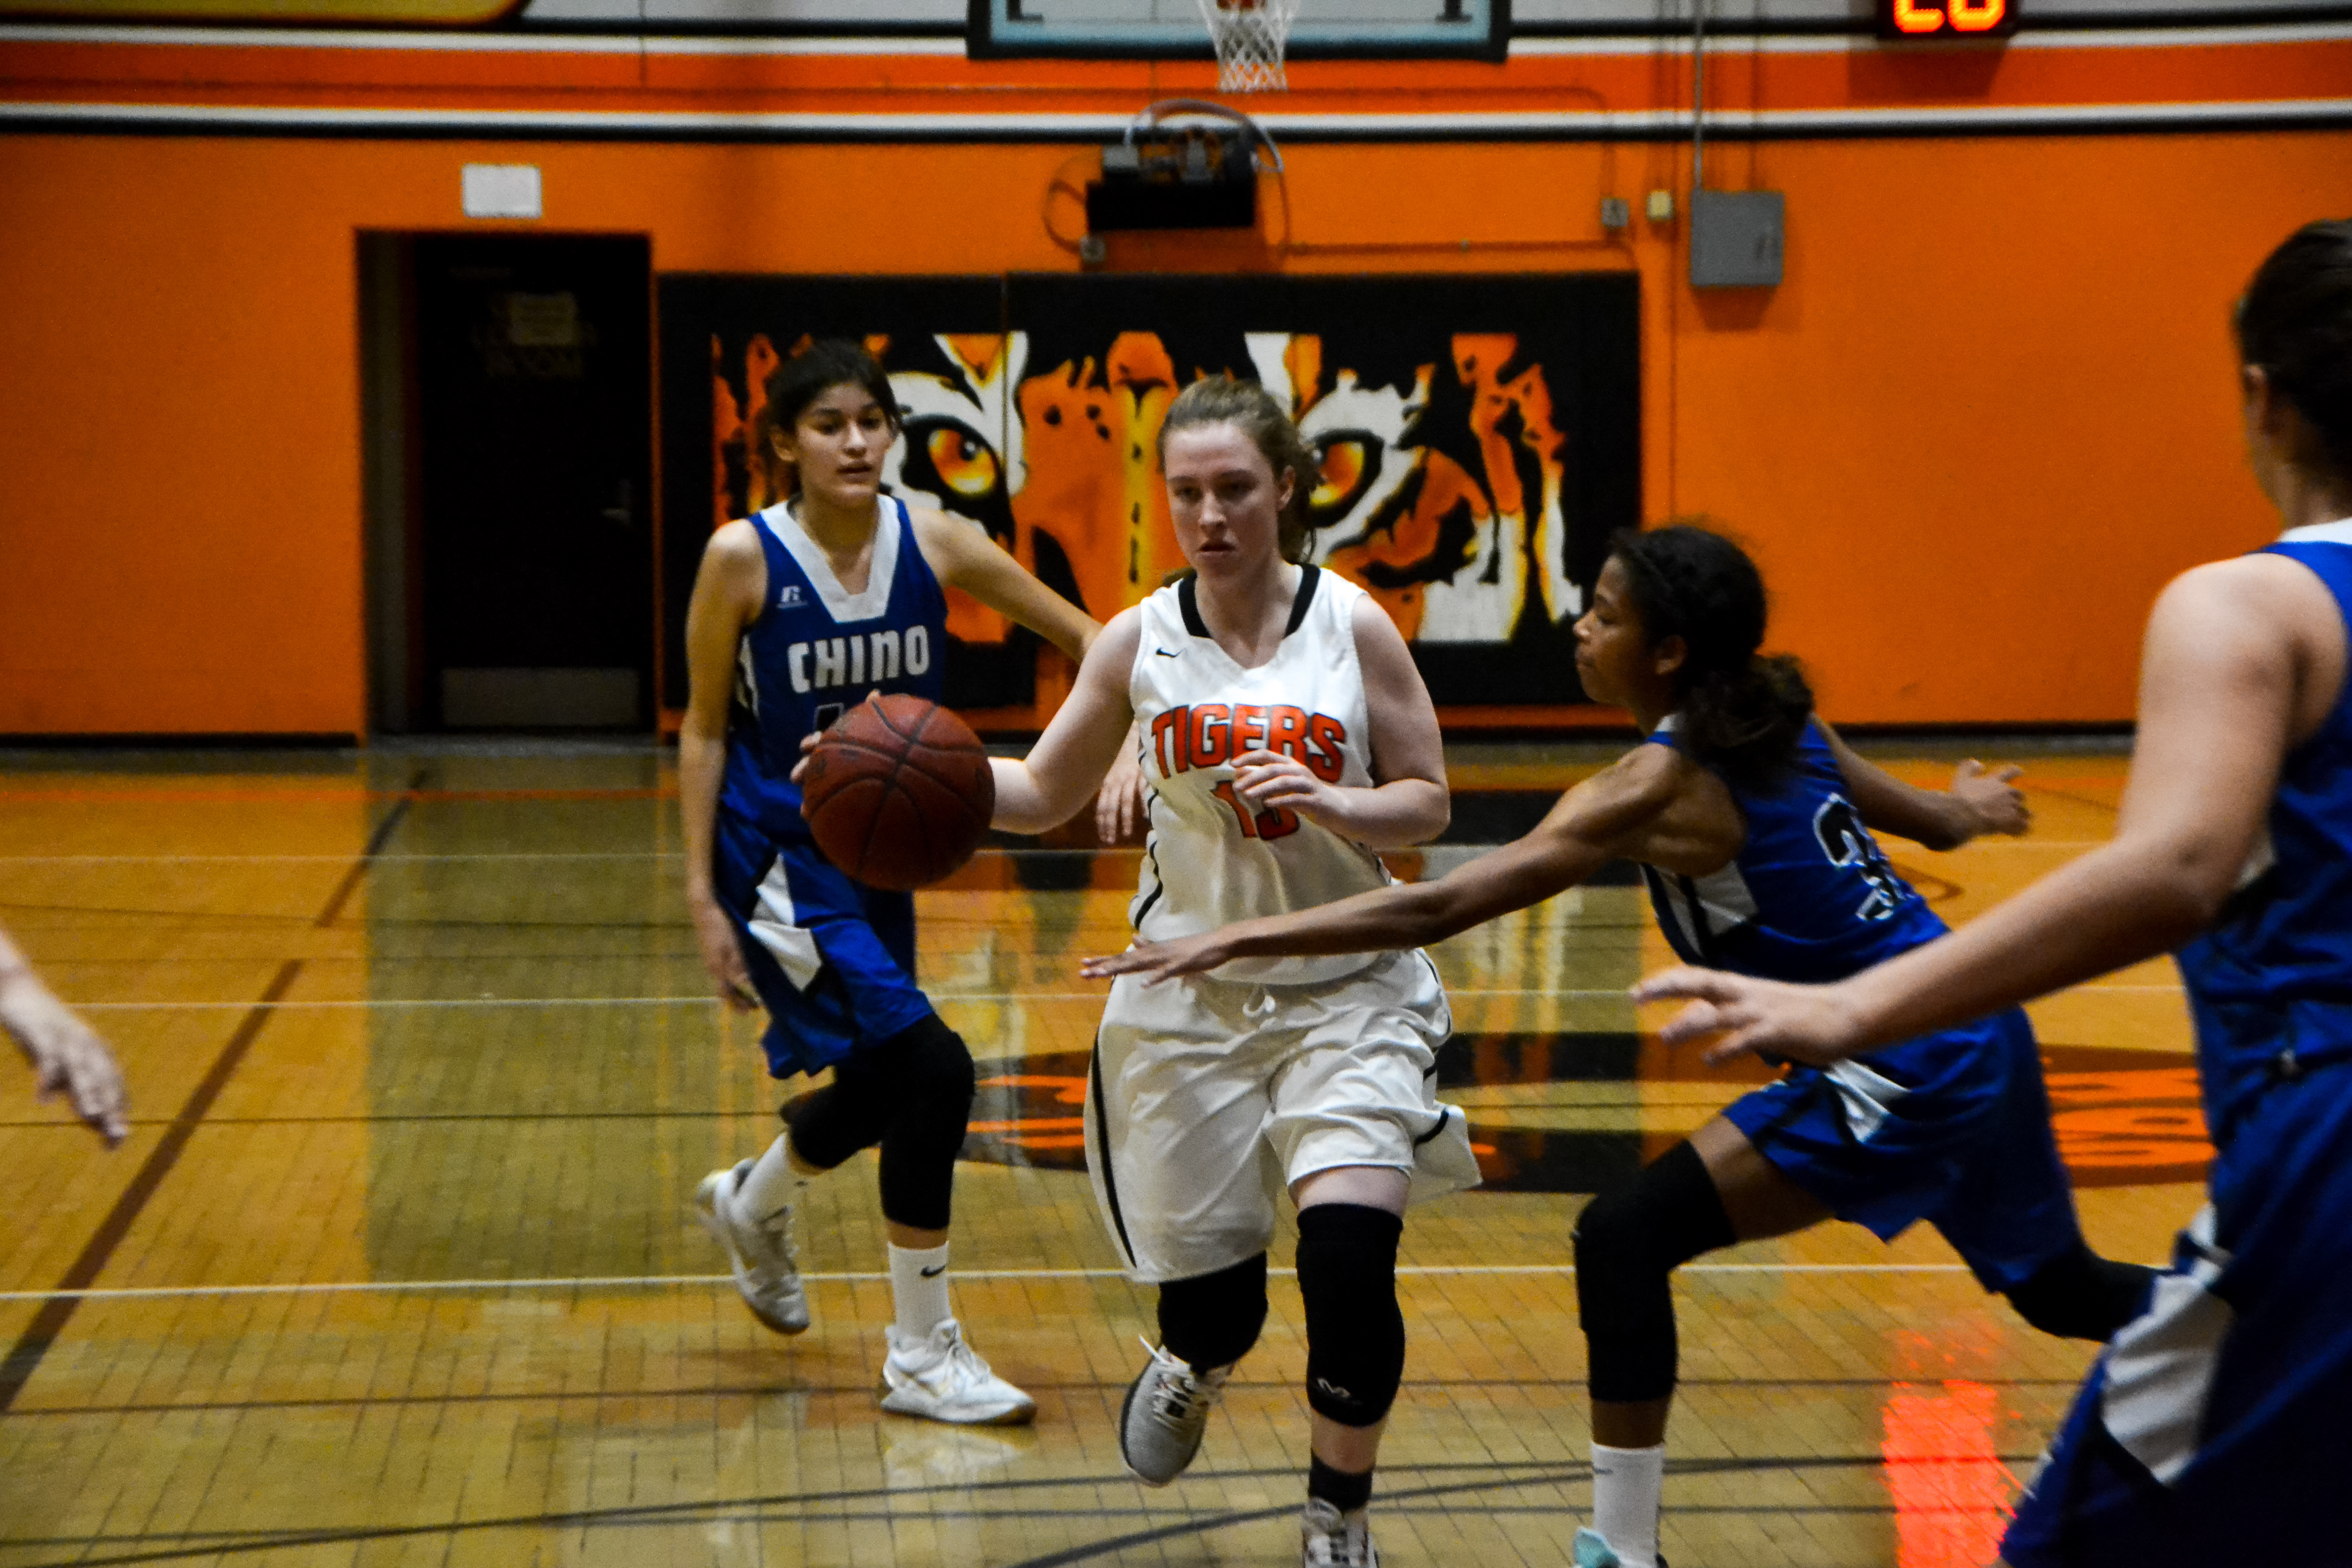 Thumbnail for Girls’ basketball defeats Chino in dramatic fashion in first round of CIF